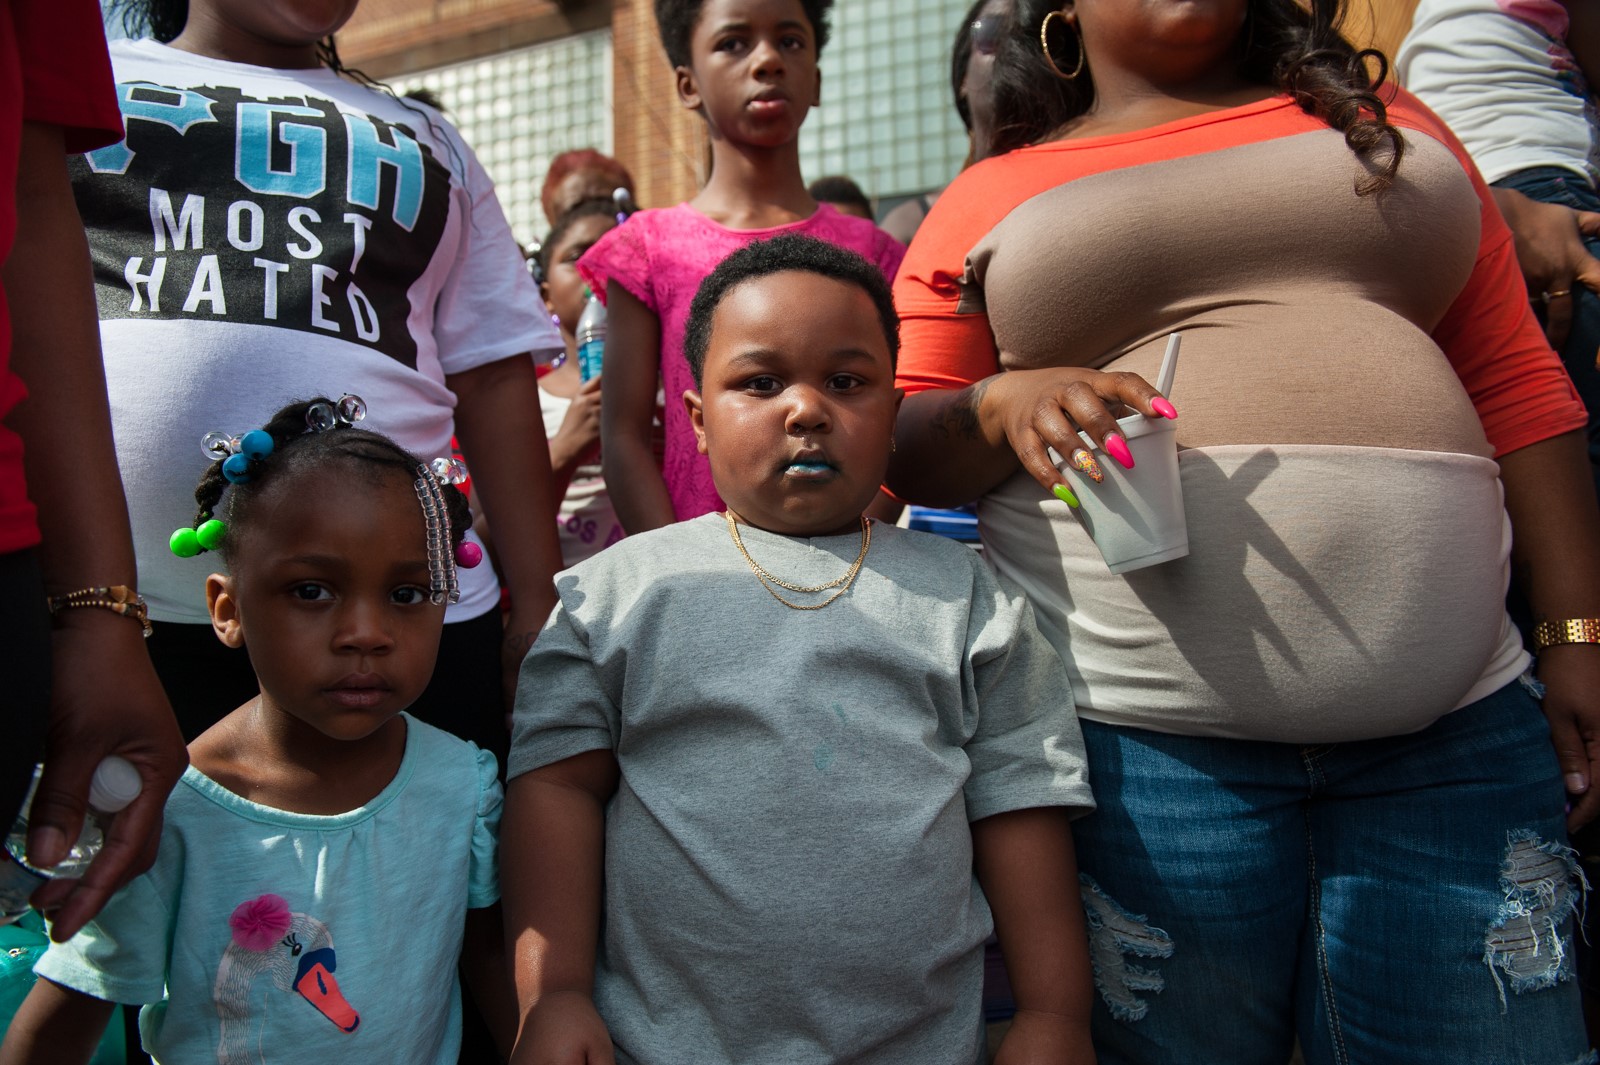 Two children in a crowd stare at the camera.